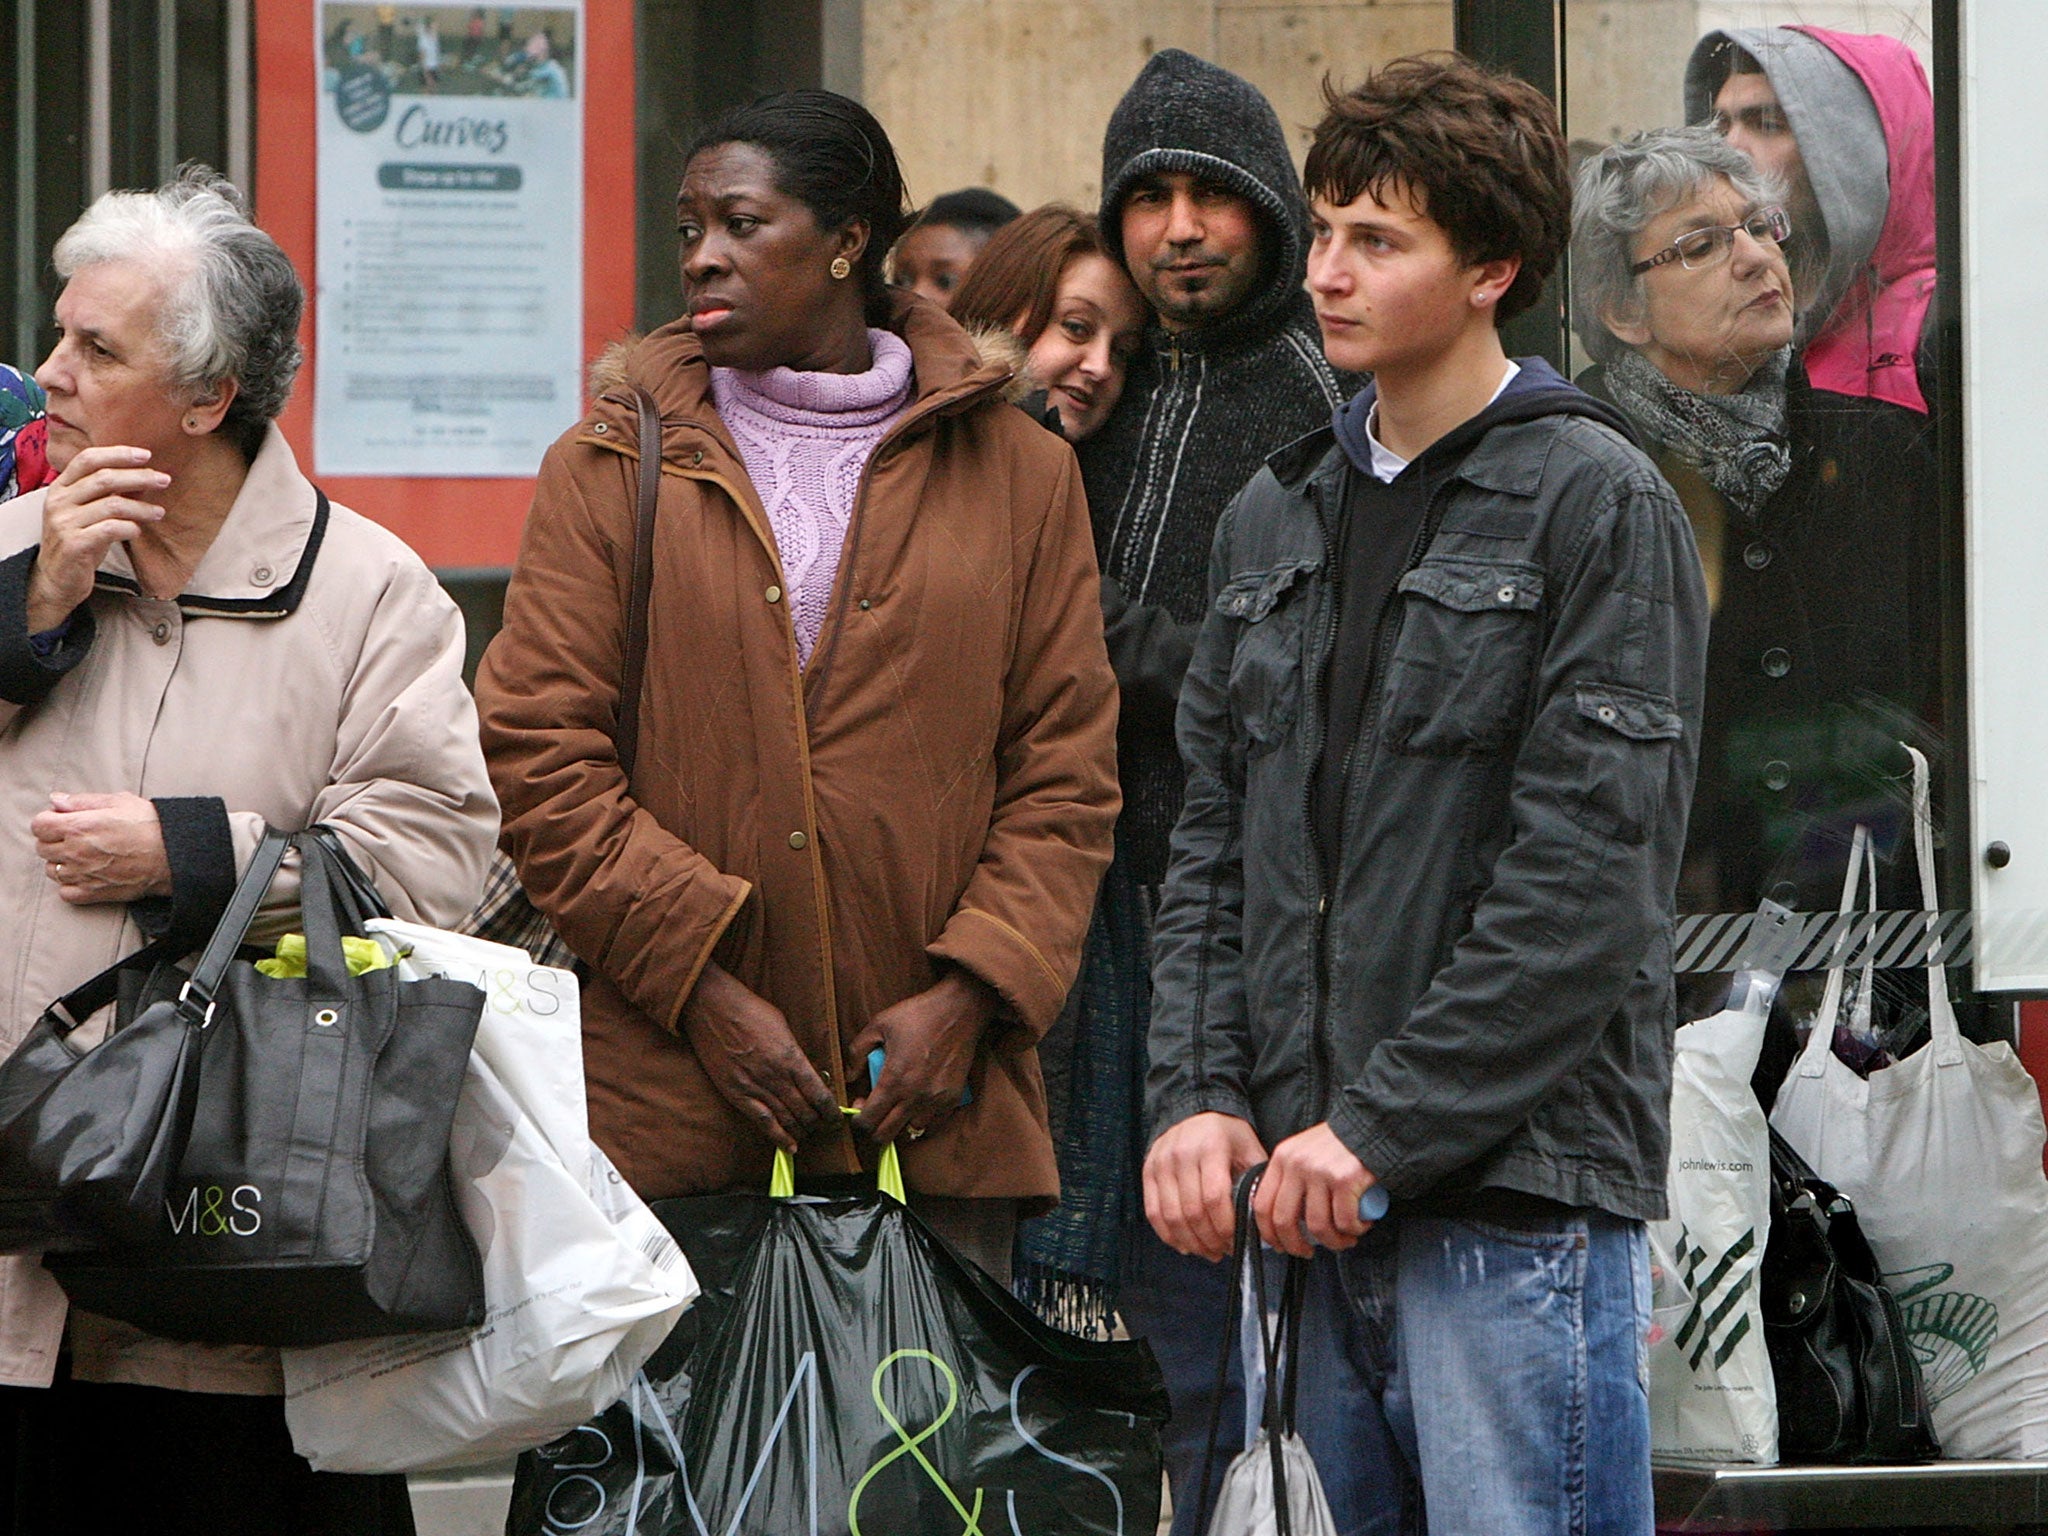 People wait for public transport at a bus-stop in Kingston Upon Thames town centre on April 19th, 2008 in London, England.